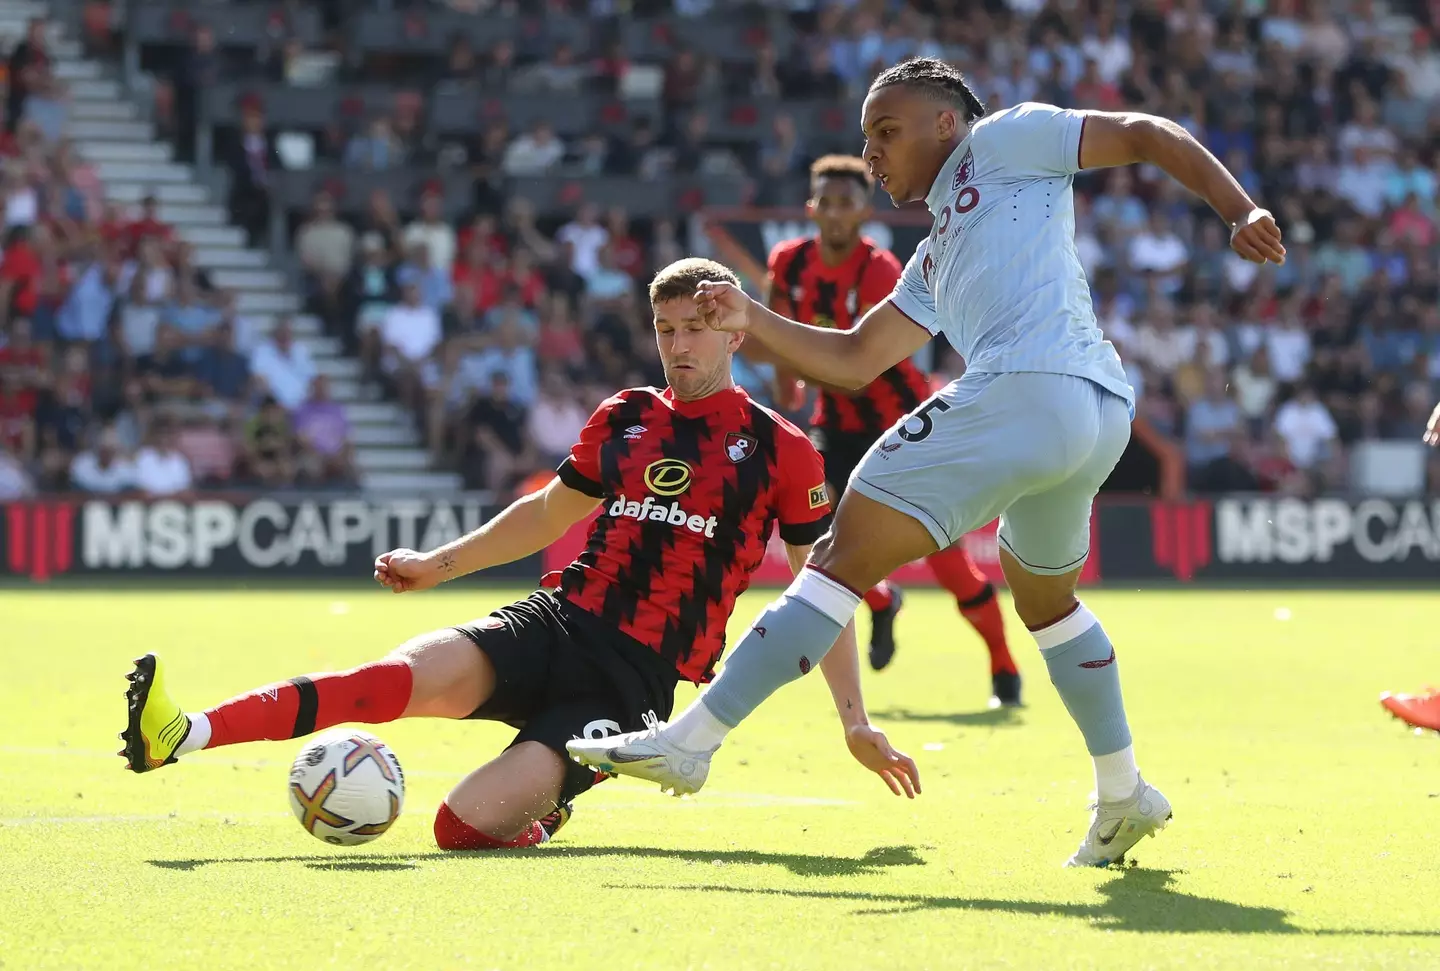 Cameron Archer of Aston Villa has his shot blocked by Chris Mepham of Bournemouth during the Premier League match at the Vitality Stadium. (Sportimage / Alamy)